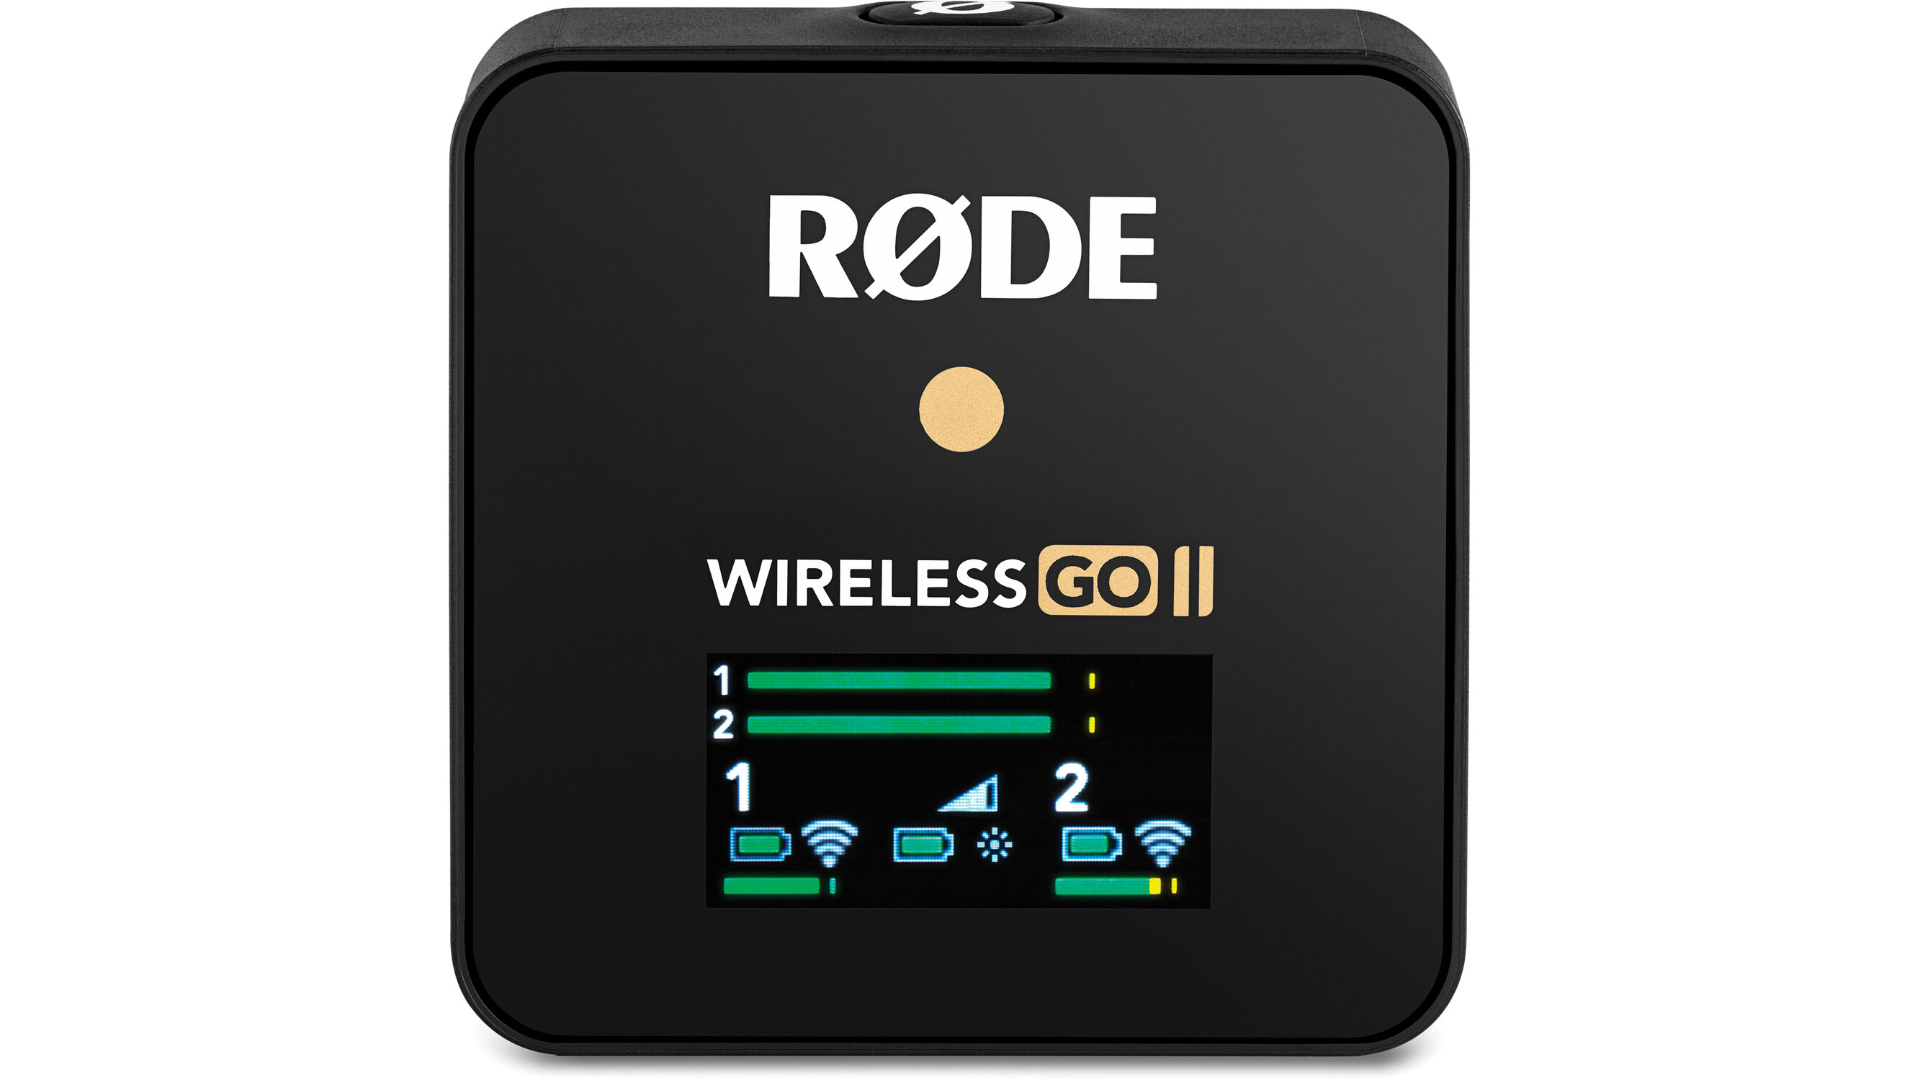 Rode Microphones Wireless GO II TX New-In-Box at Roberts Camera